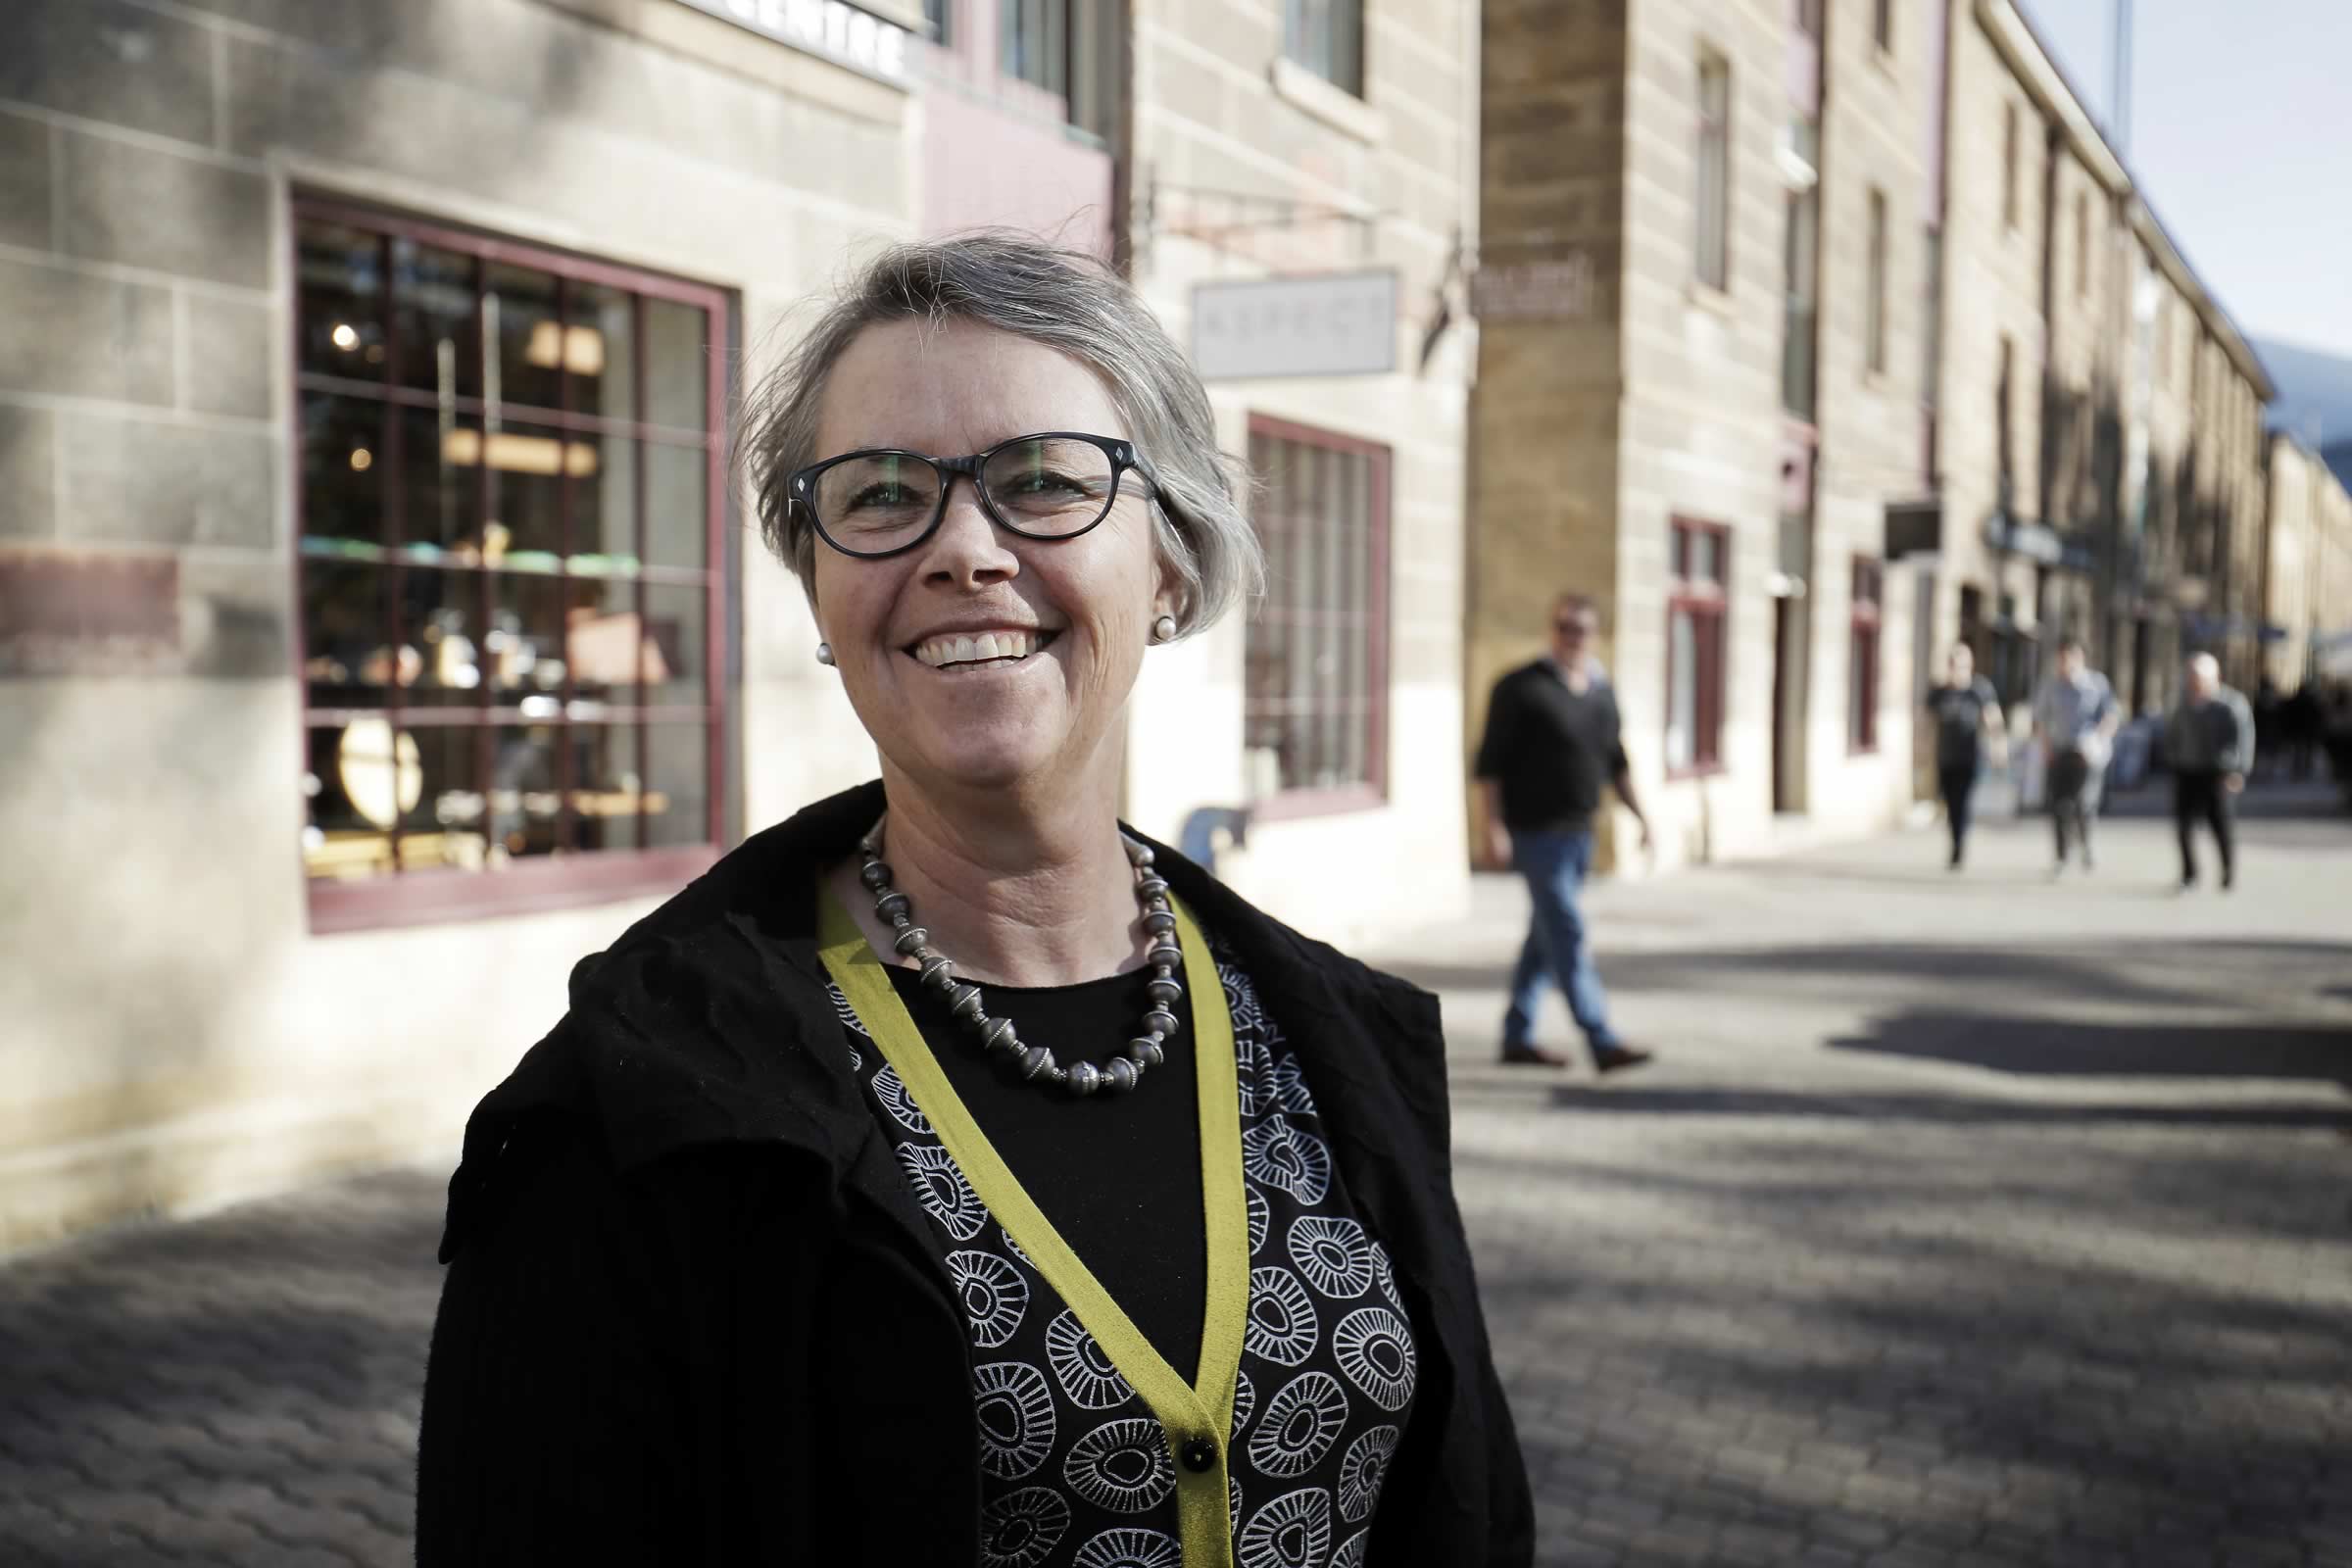 Yvette Breytenbach, Director, Morrison & Breytenbach Architects, is the newly appointed Tasmanian Chapter President of the Australian Institute of Architects. Photo by Richard Jupe / Newpix.